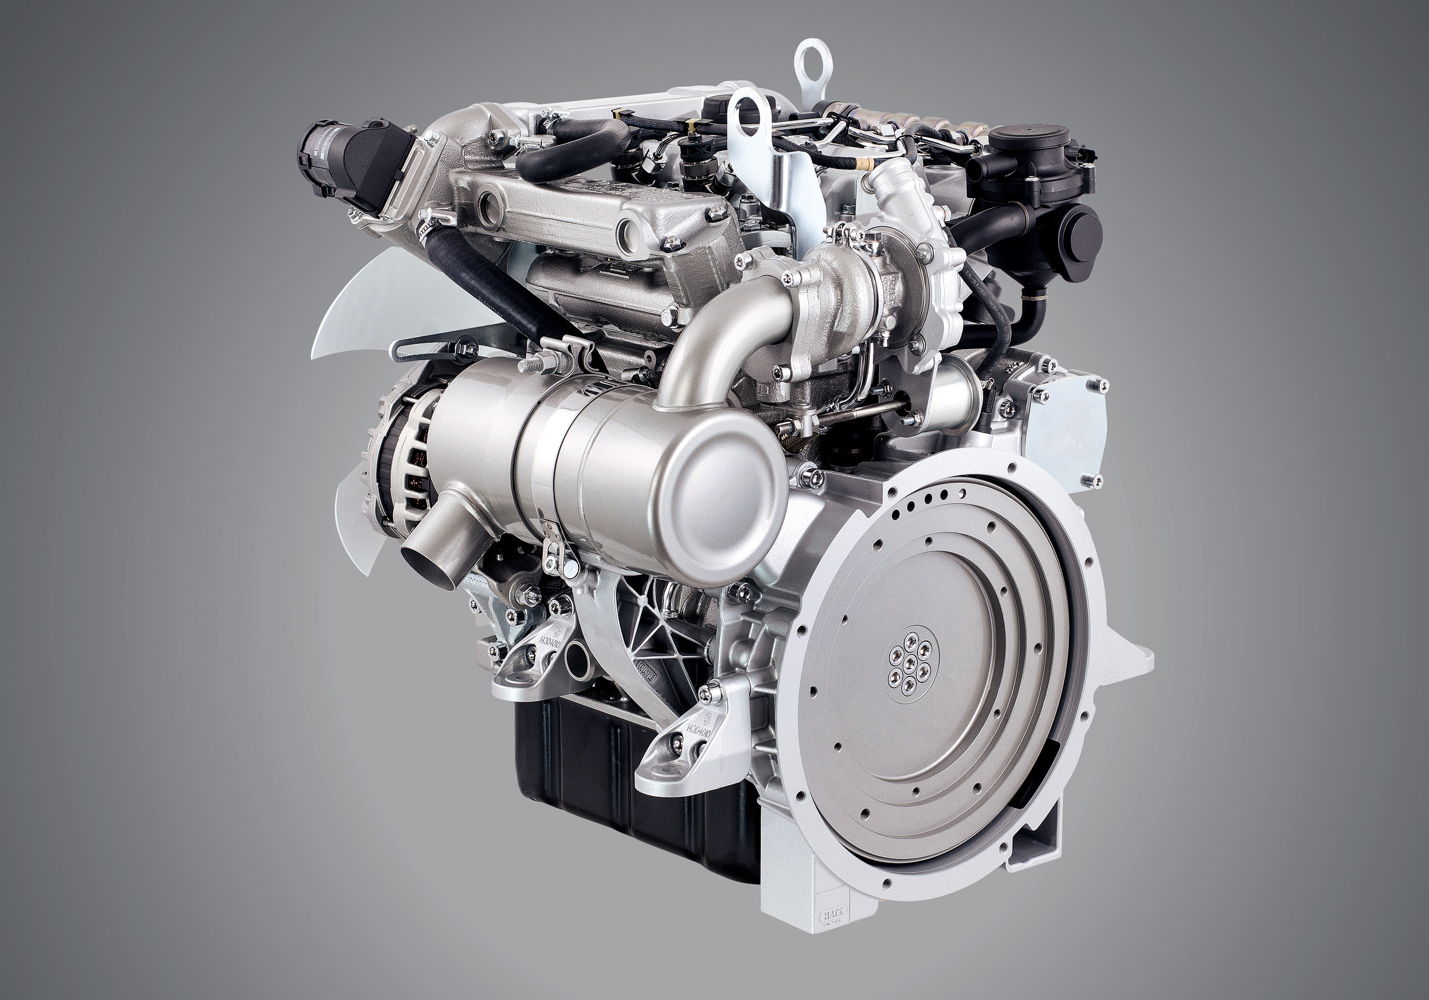 Marine world premiere of the small Southern German power package: the liquid-cooled three-cylinder Hatz 3H50TIC